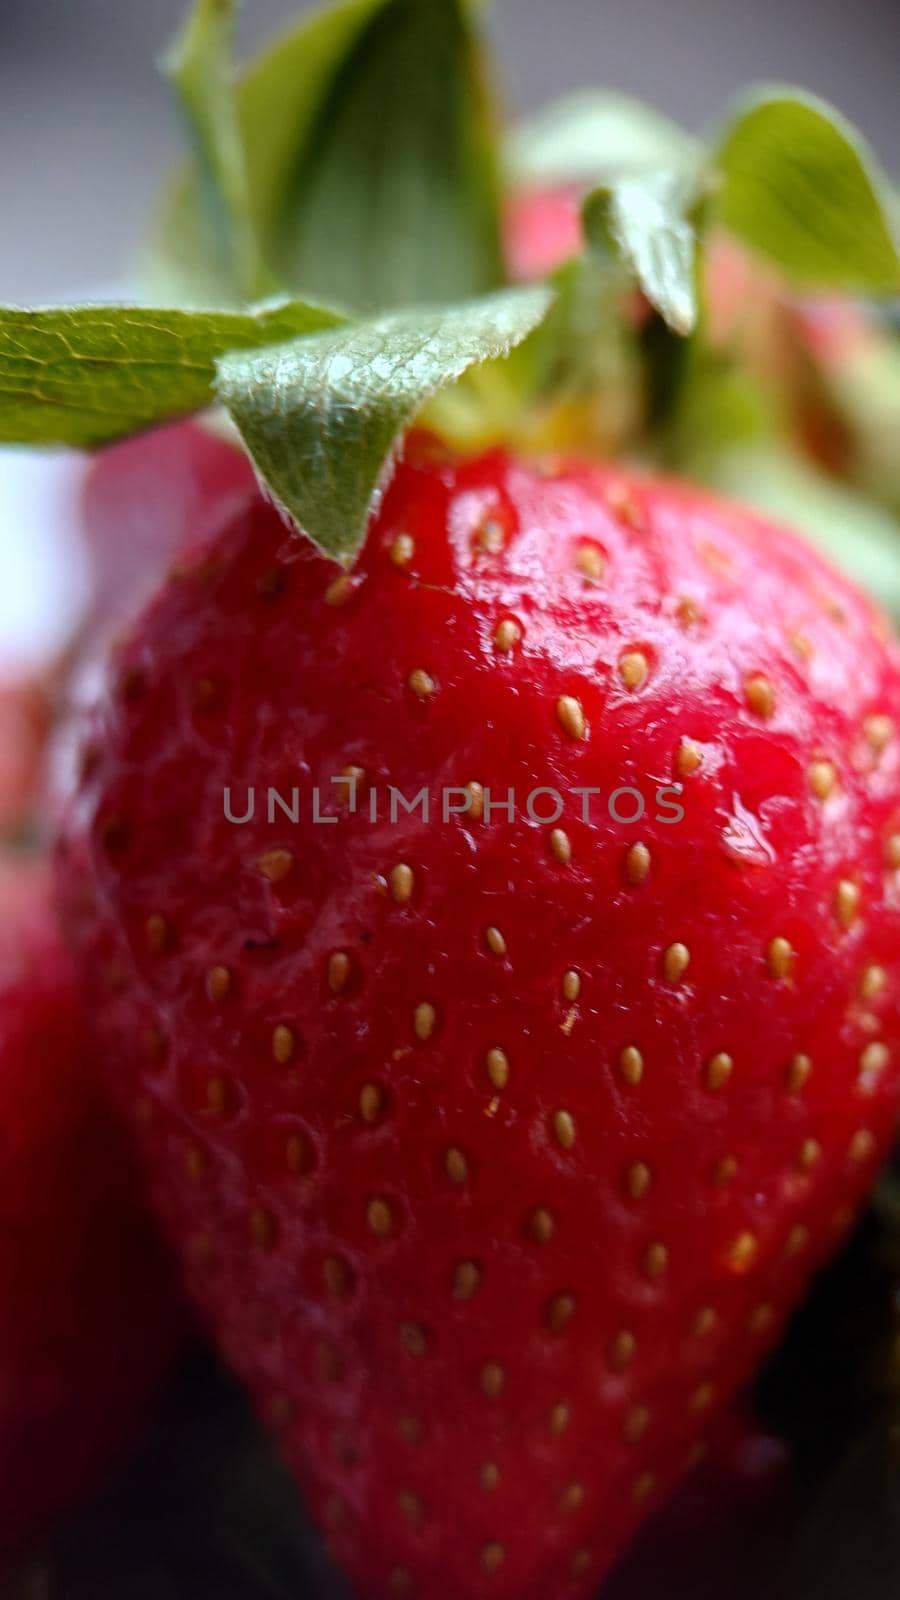 Garden ripe strawberries with green leaves close-up by Mastak80